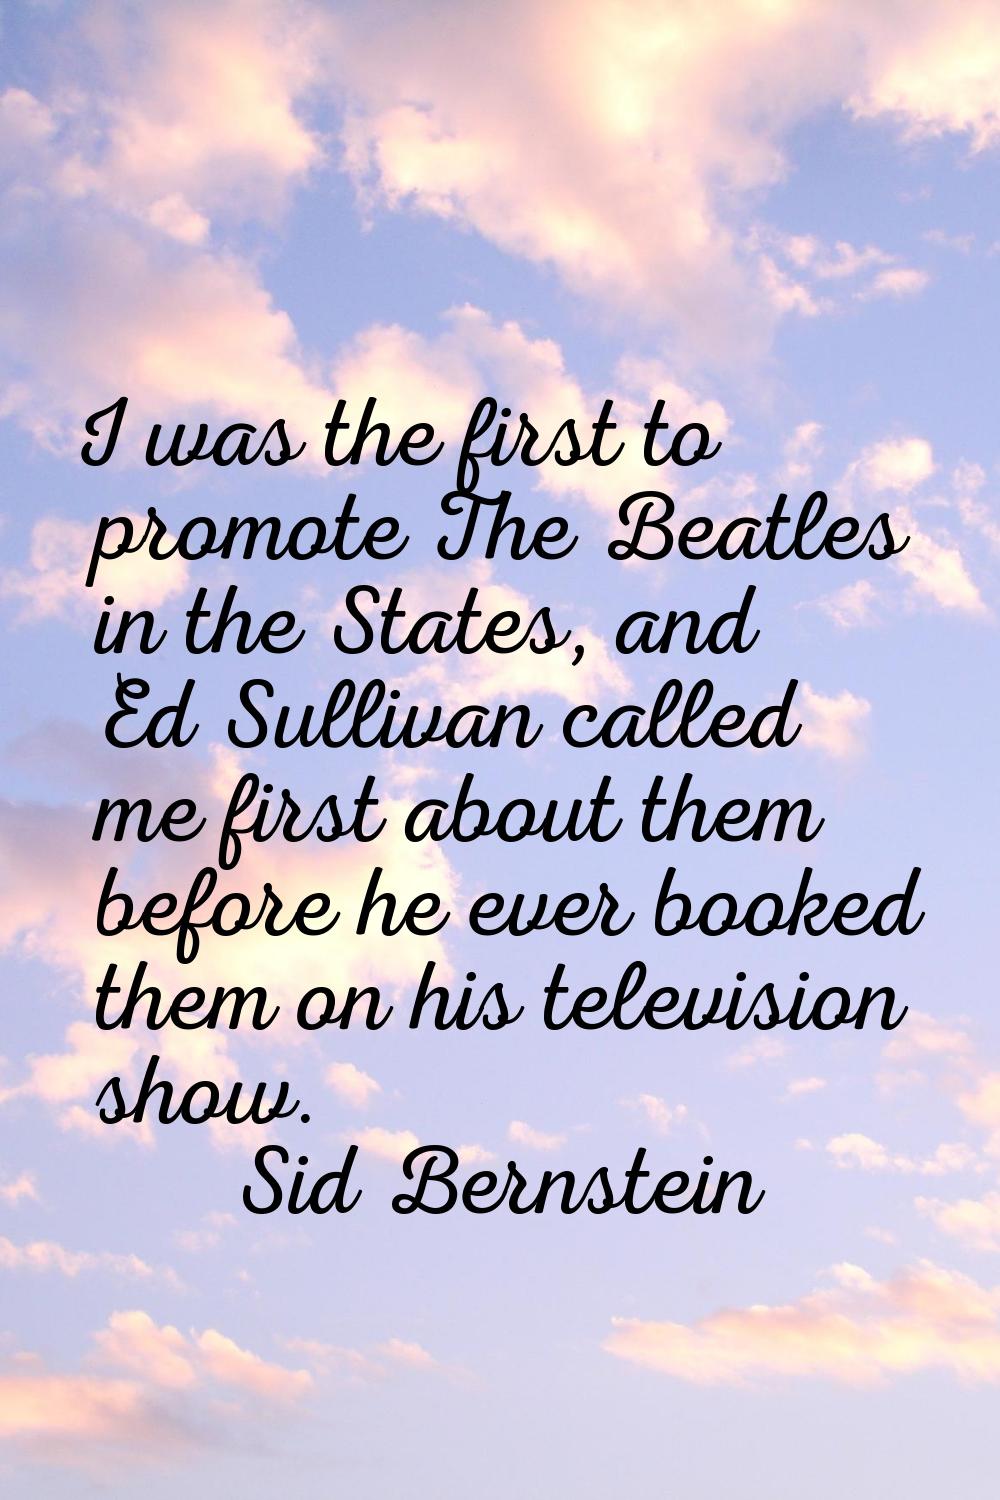 I was the first to promote The Beatles in the States, and Ed Sullivan called me first about them be